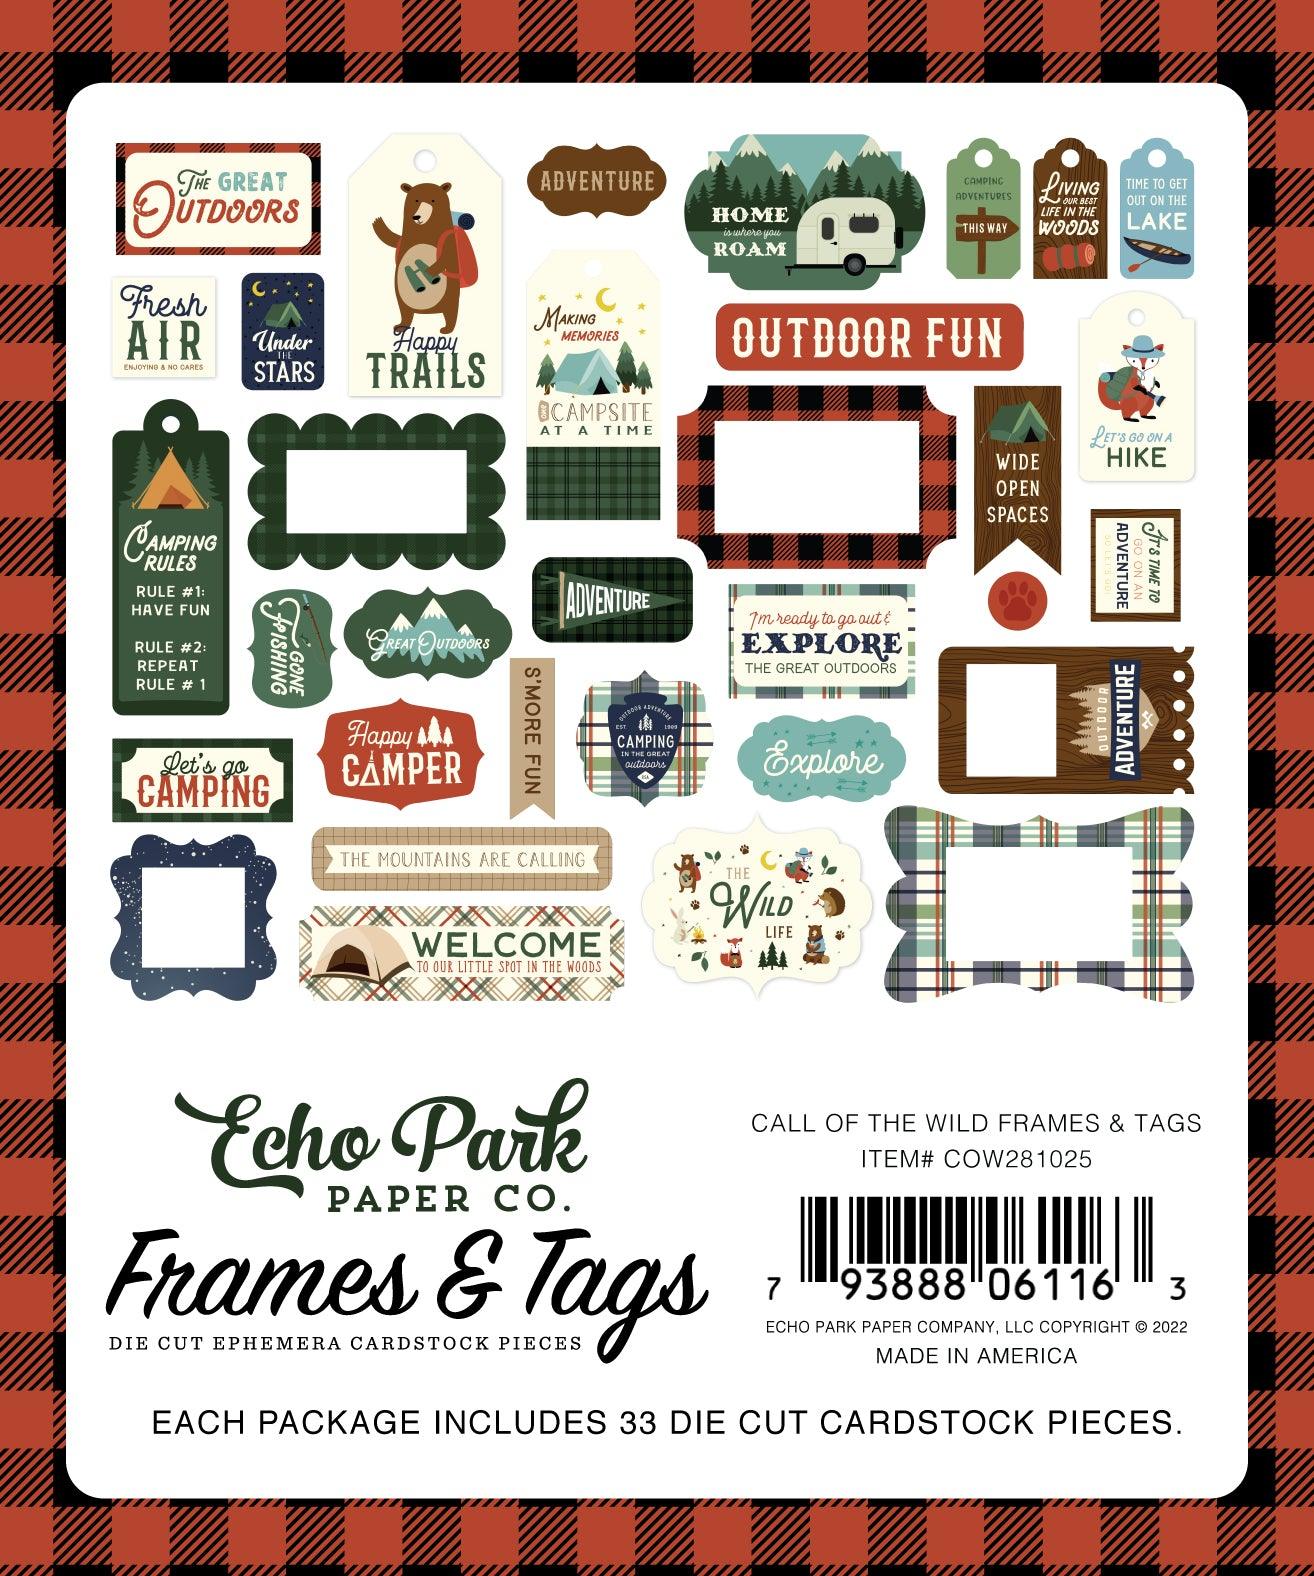 Call Of The Wild Collection 5 x 5 Scrapbook Tags & Frames Die Cuts by Echo Park Paper - Scrapbook Supply Companies